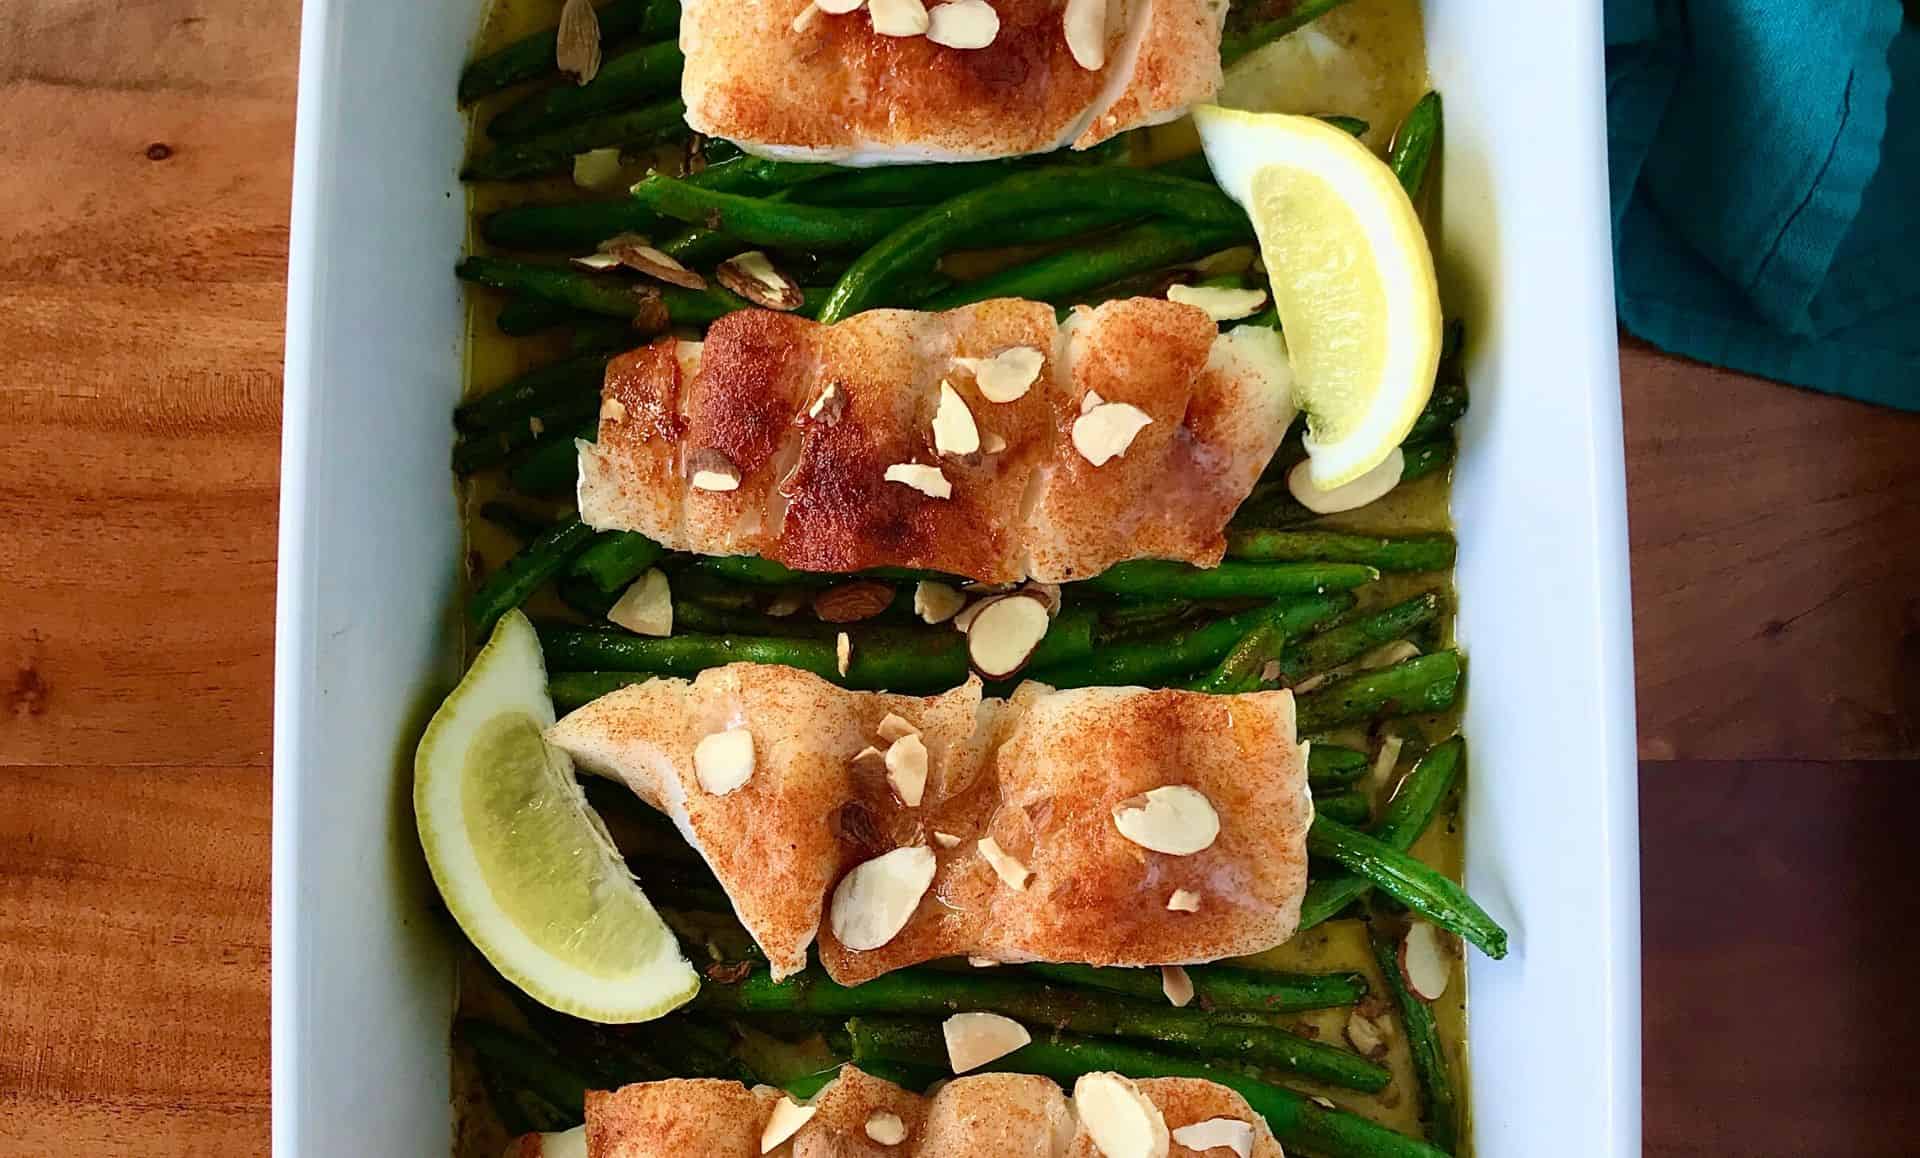 Spiced Butter Baked Cod with Green Beans